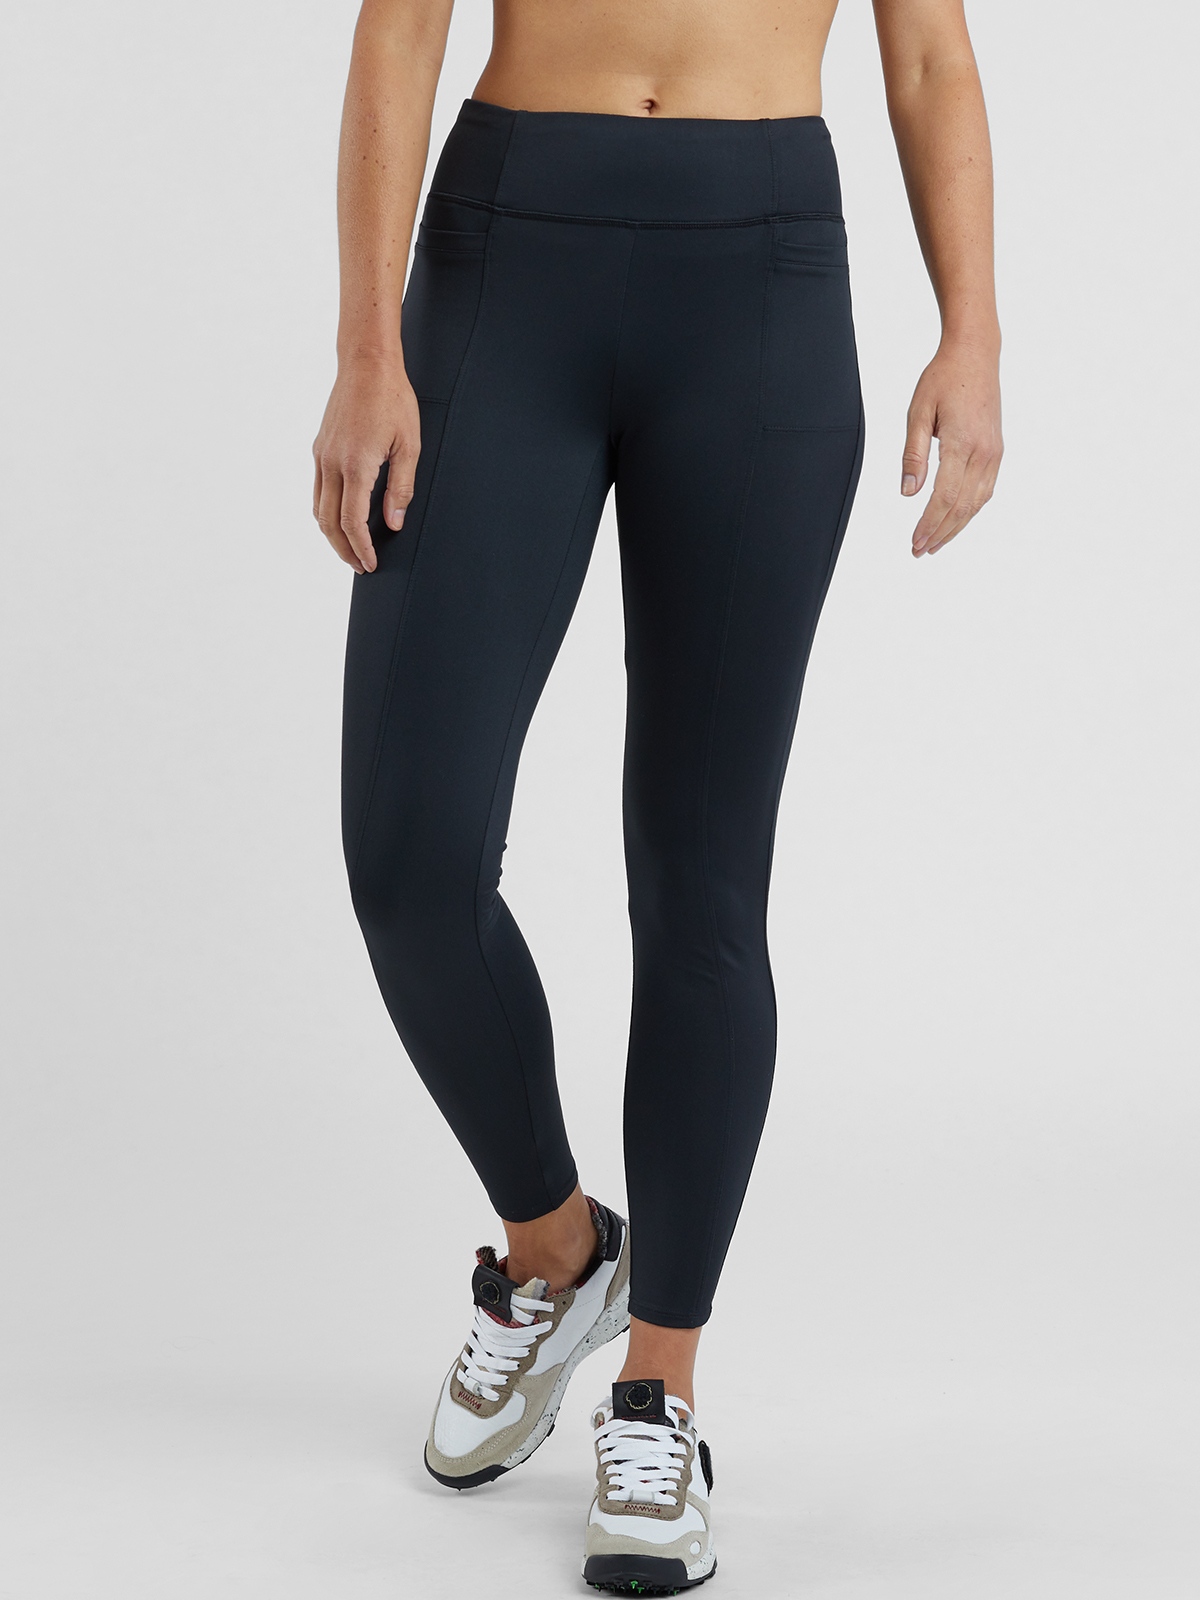 Toad&Co Womens Tights - Circadian Leggings